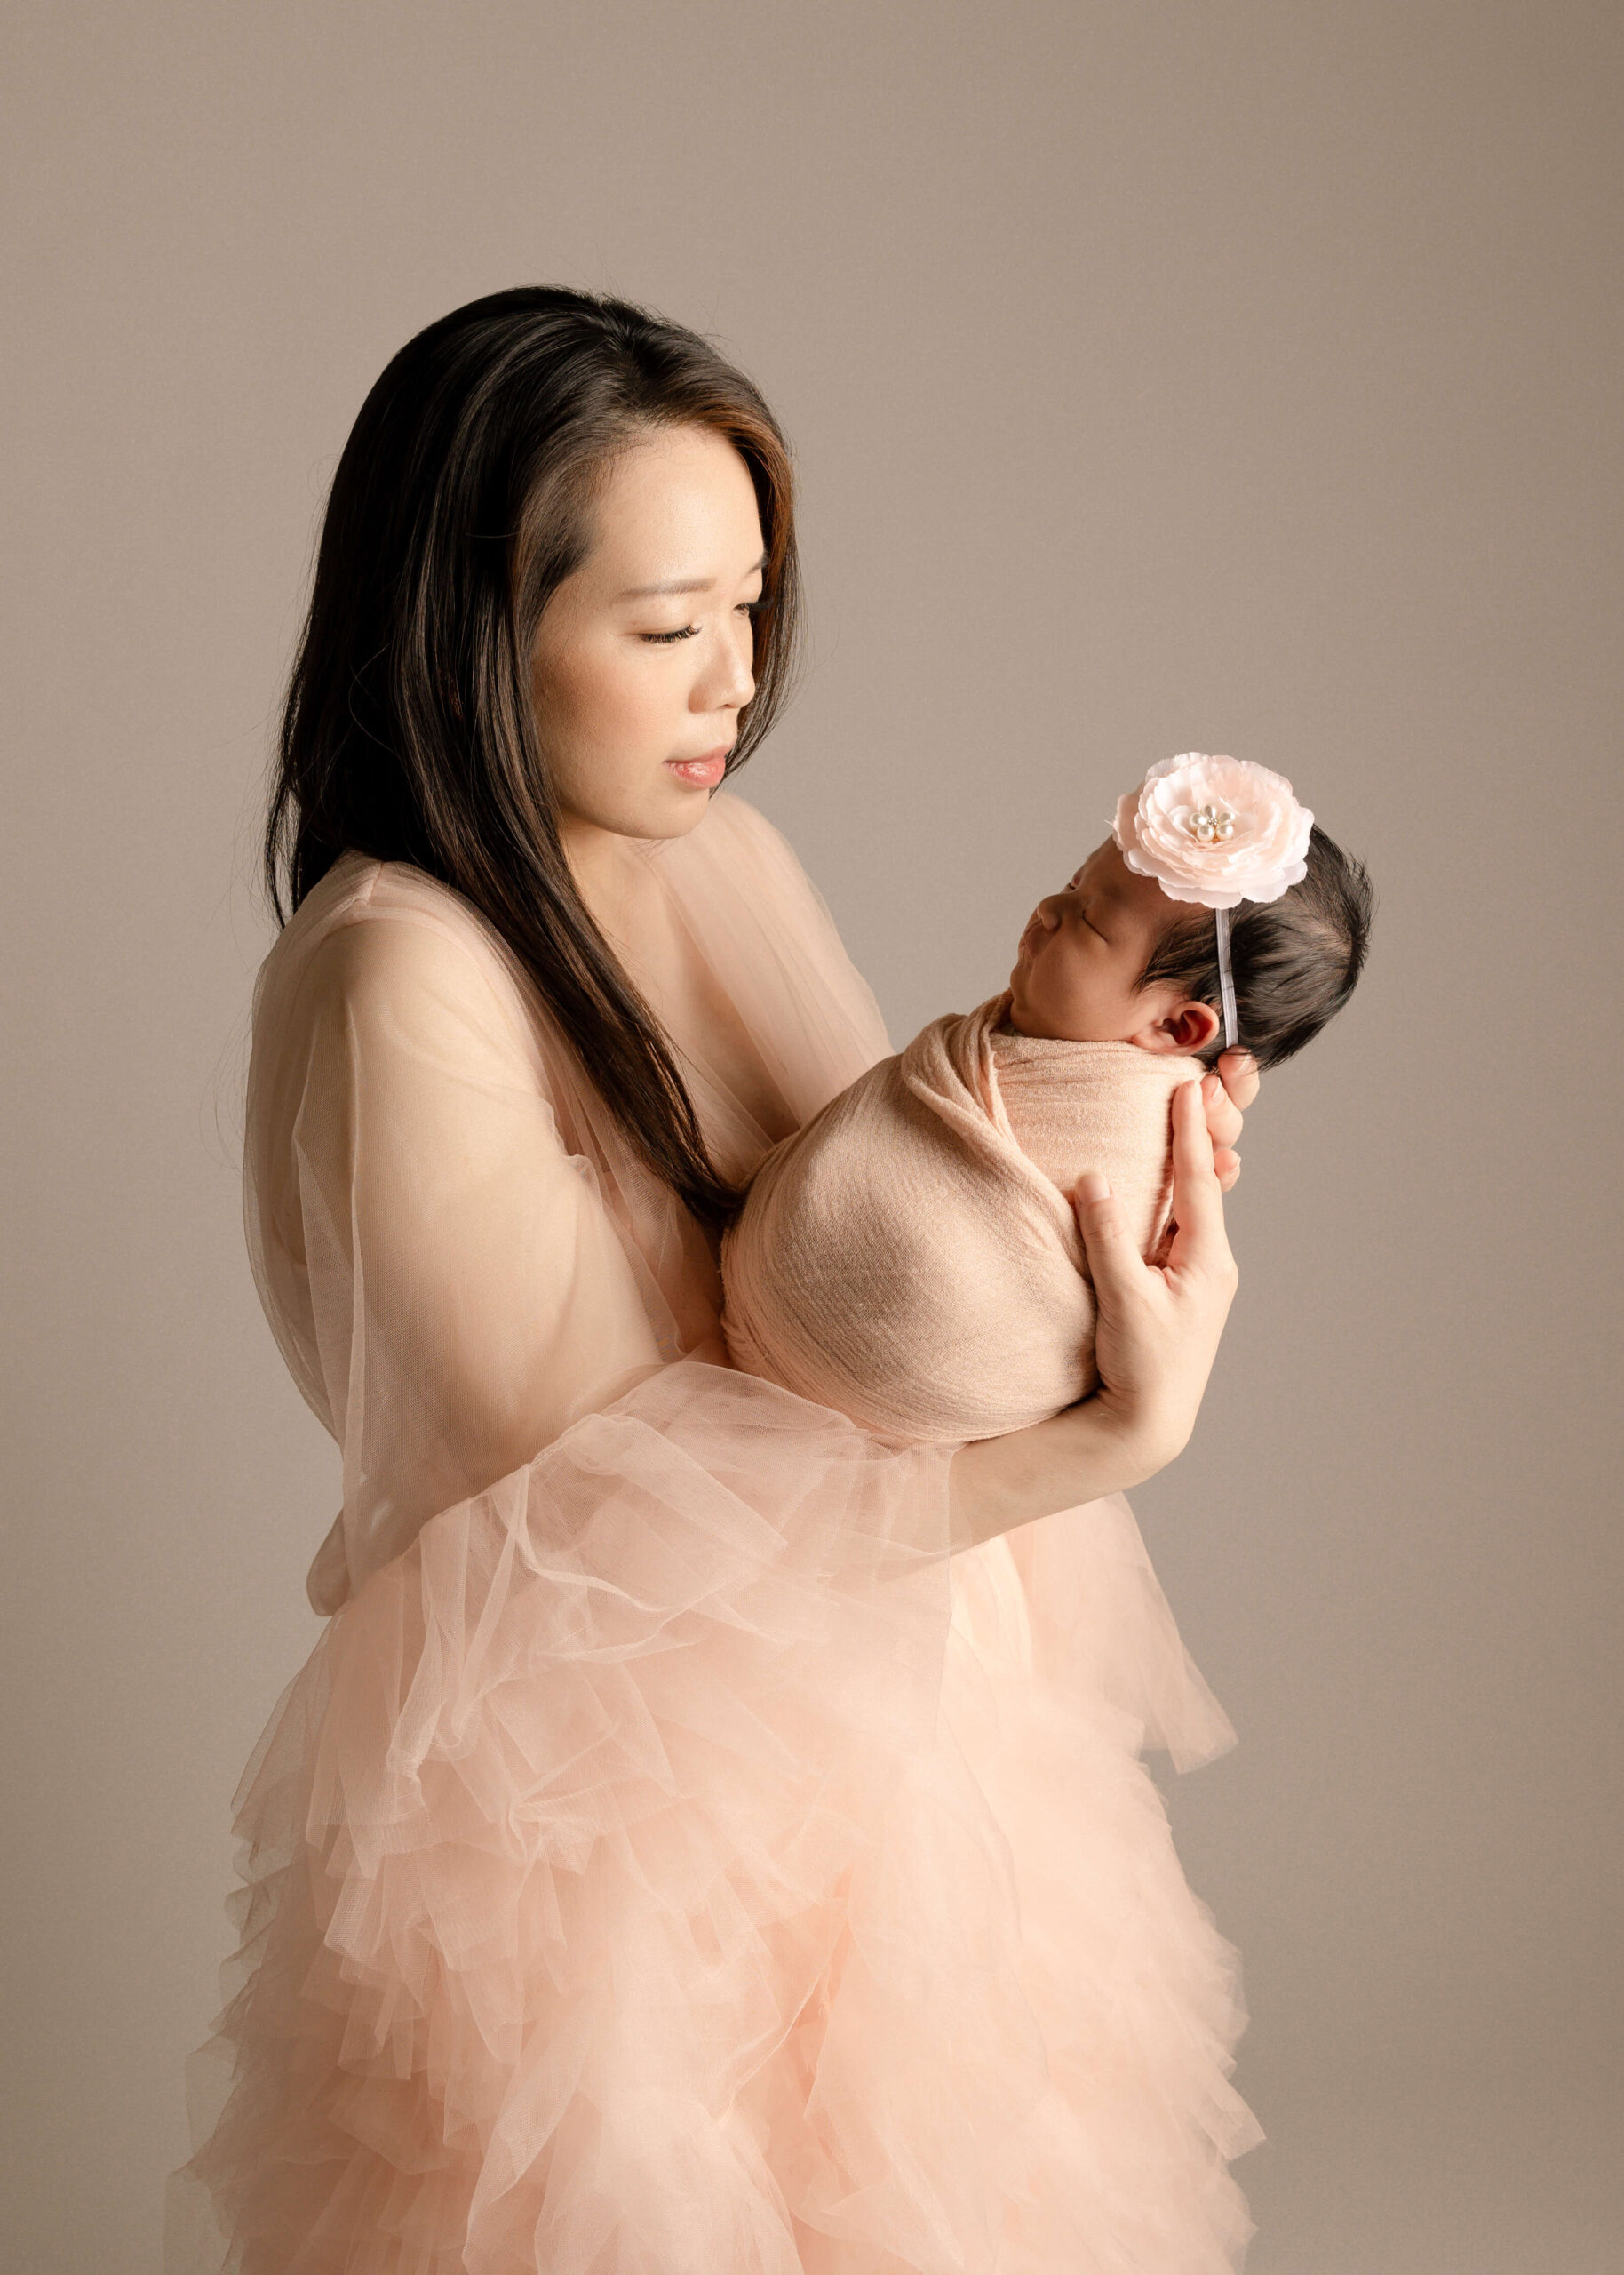 Mom wearing pink ruffled robe holding her baby while looking down at her in Orange County studio by Ashley Nicole.